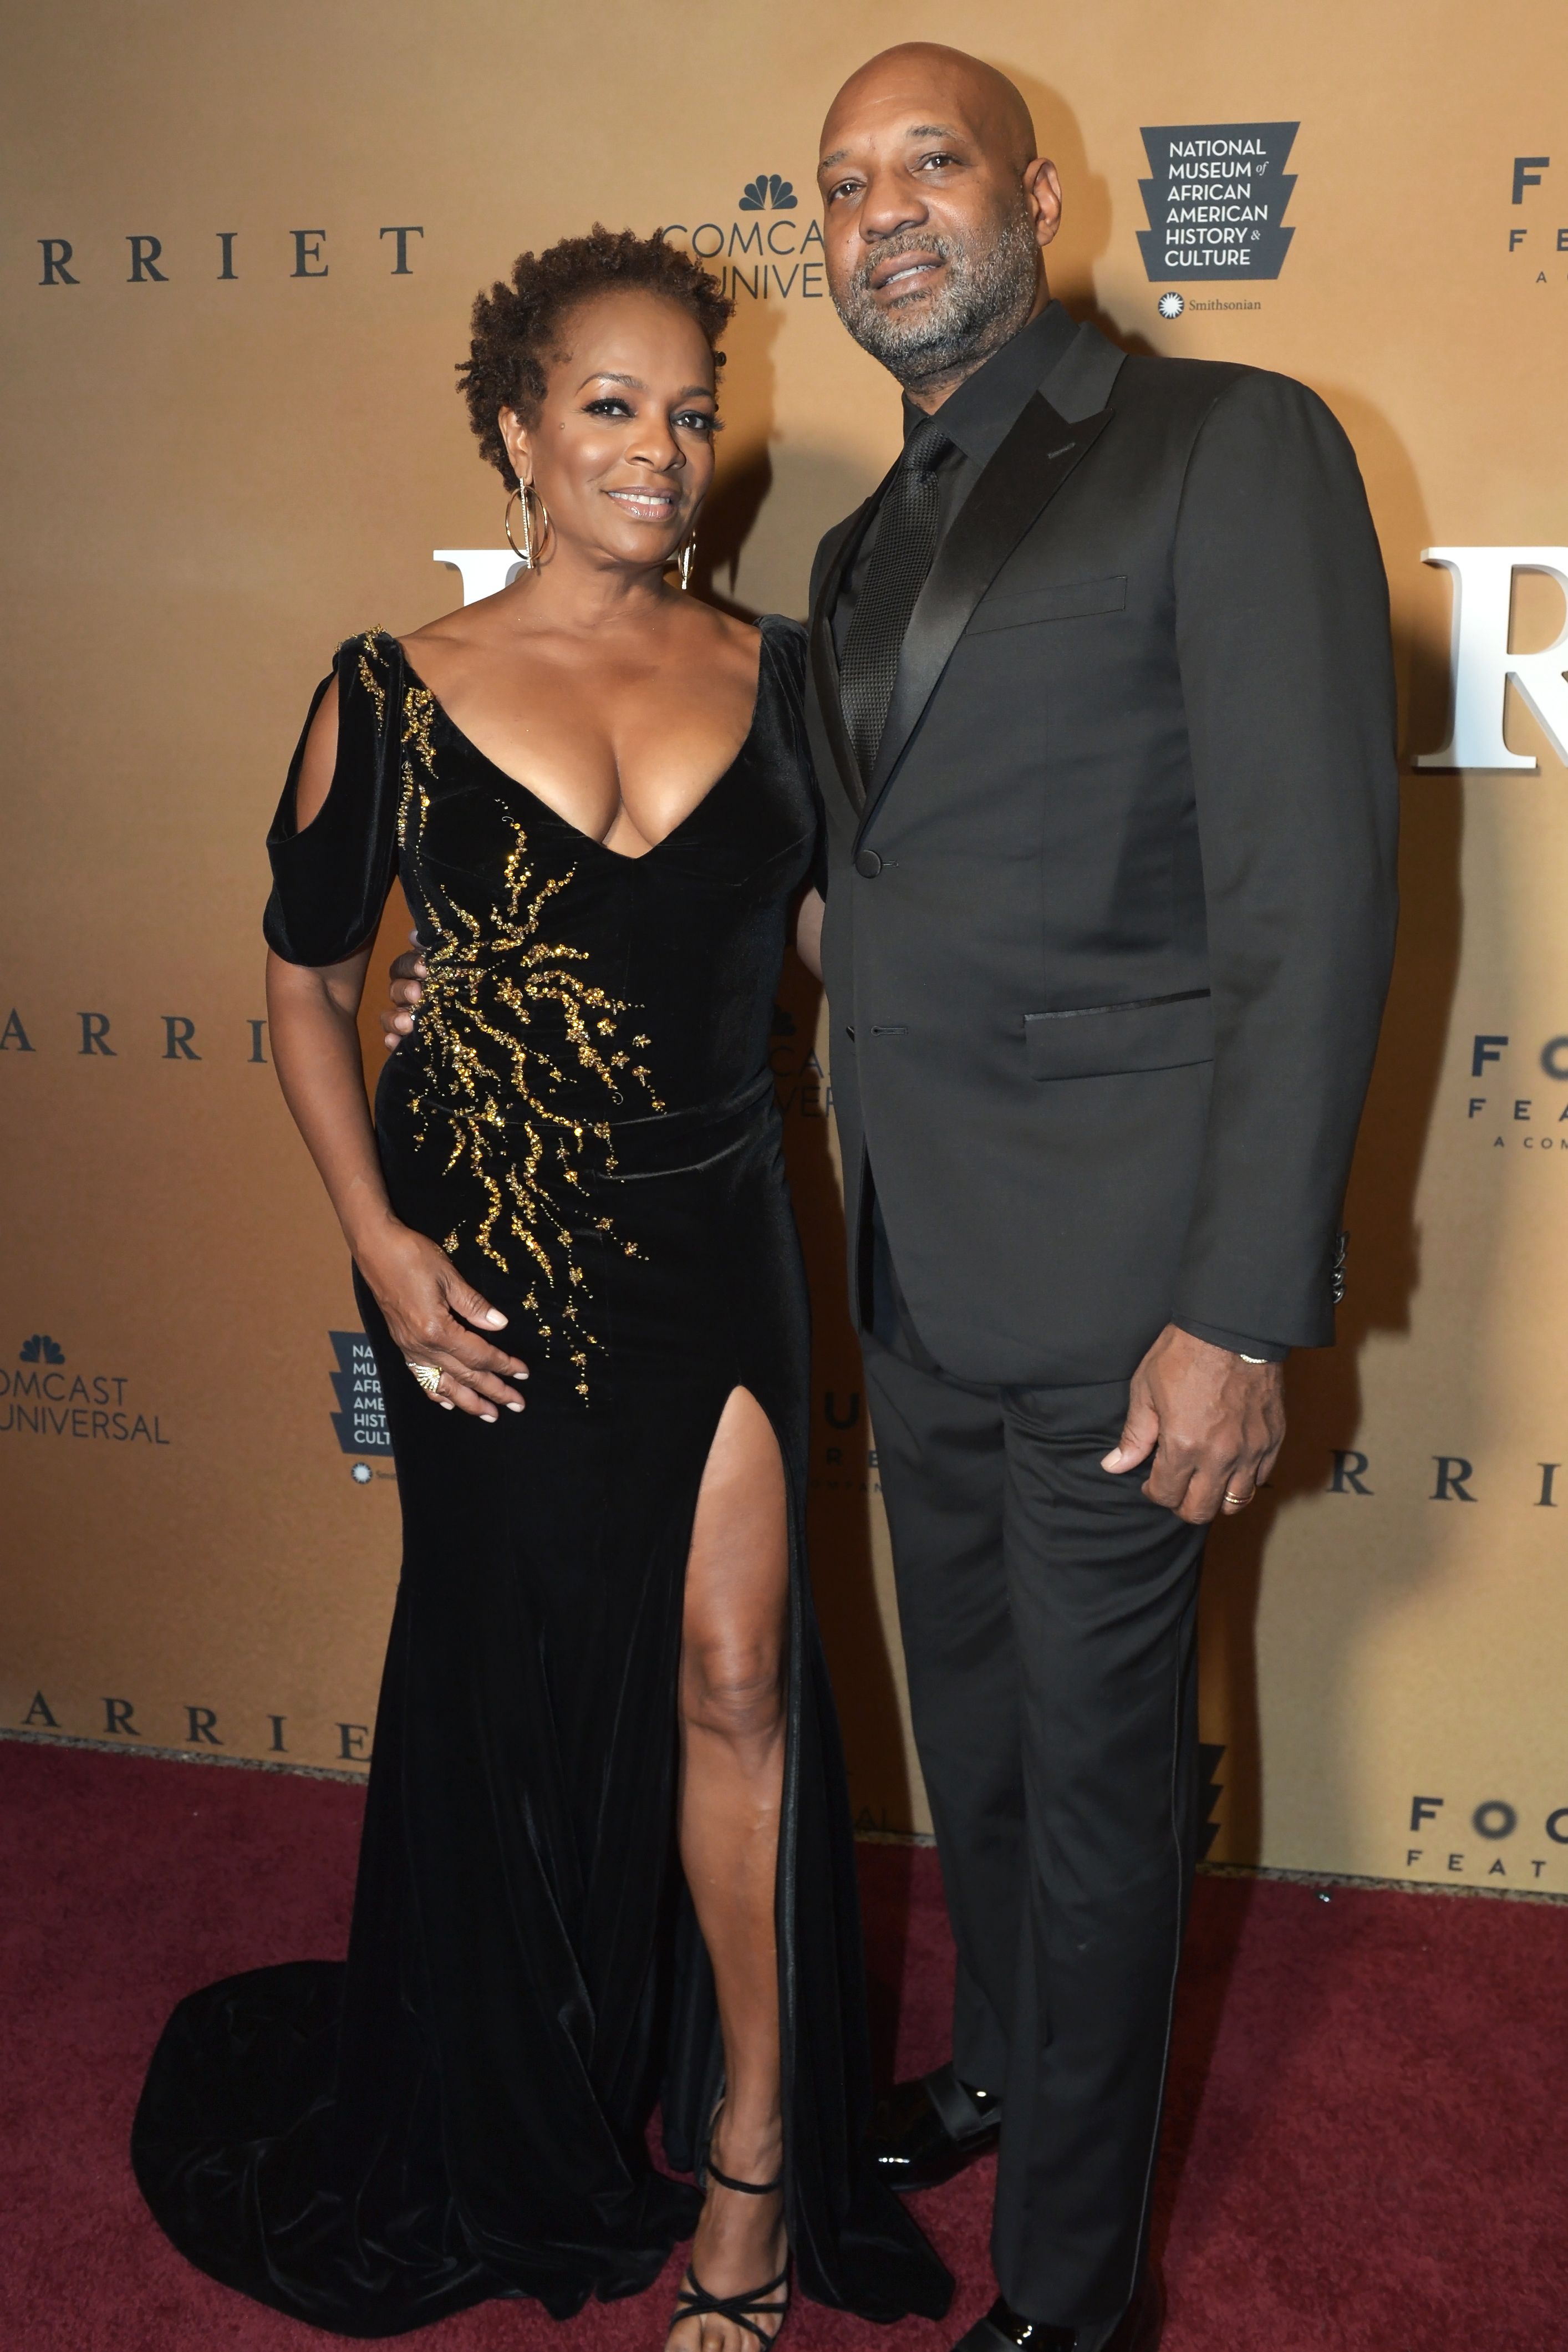 Vanessa Bell Calloway and her husband Anthony Calloway at the Washington, DC premiere of "Harriet" on October 22, 2019 in Washington, DC | Photo: Getty Images 